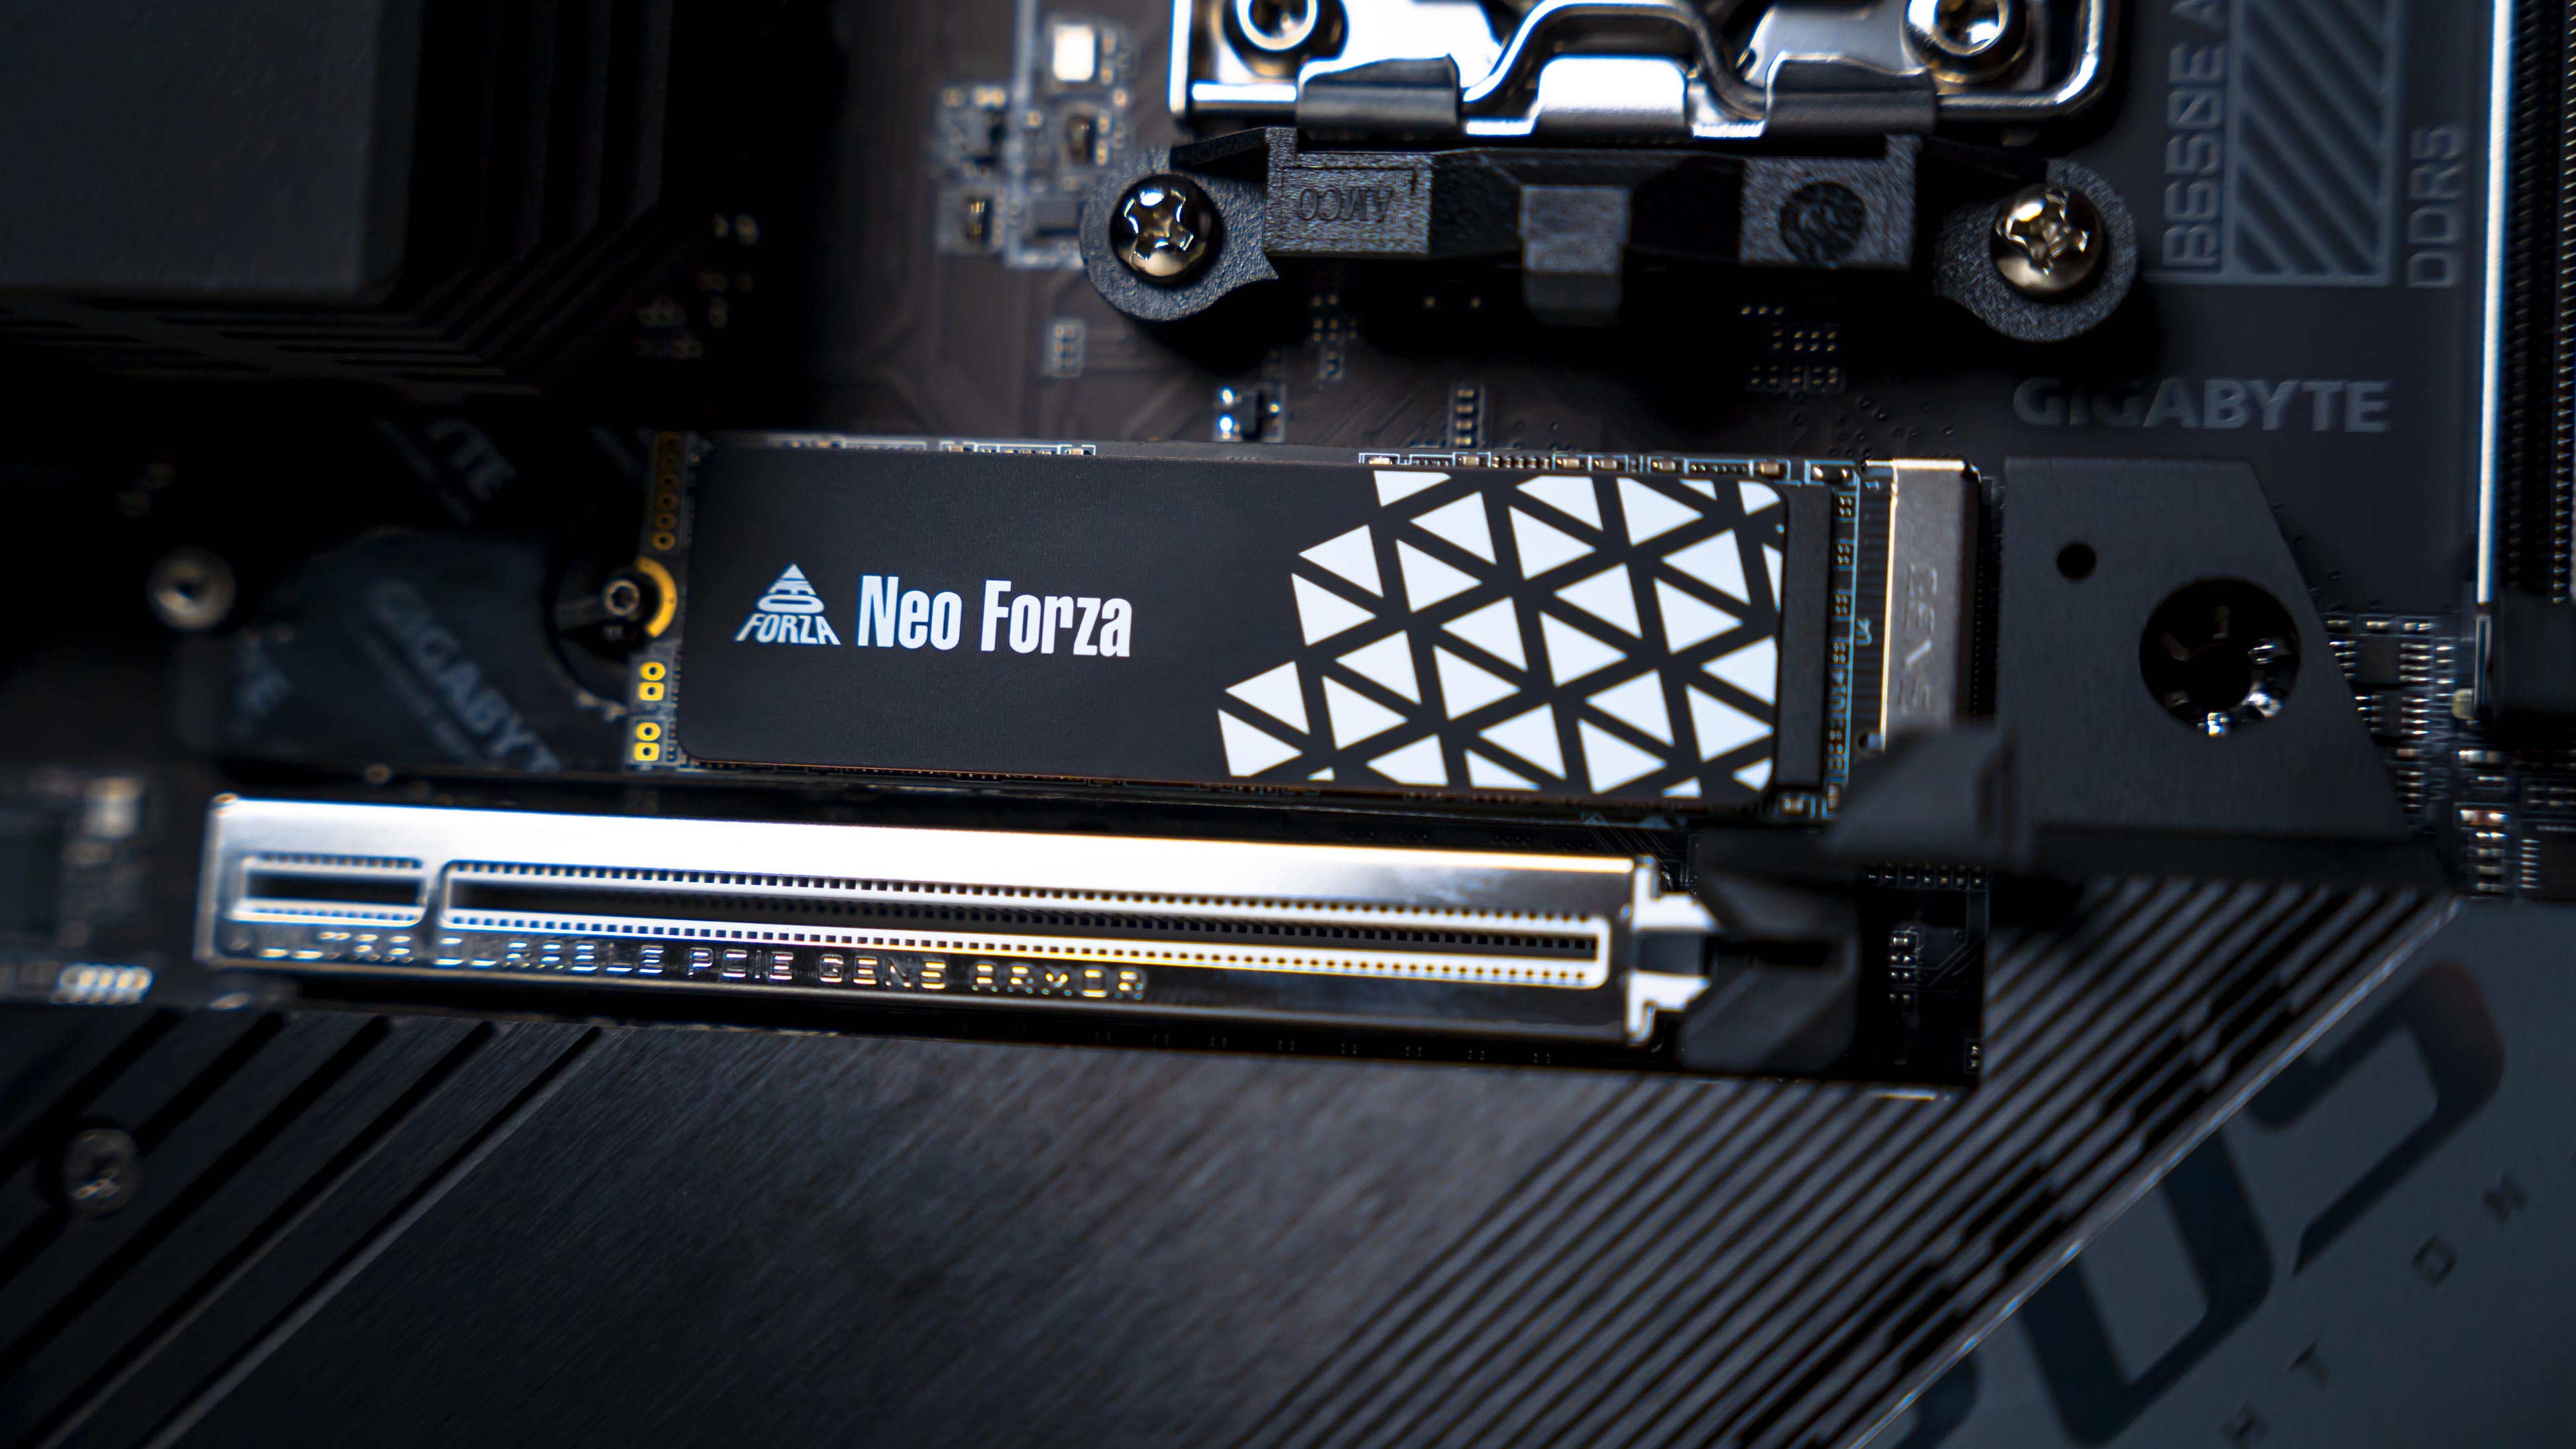 Neo Forza NFP445 1TB Gen4 PC Installation (1)